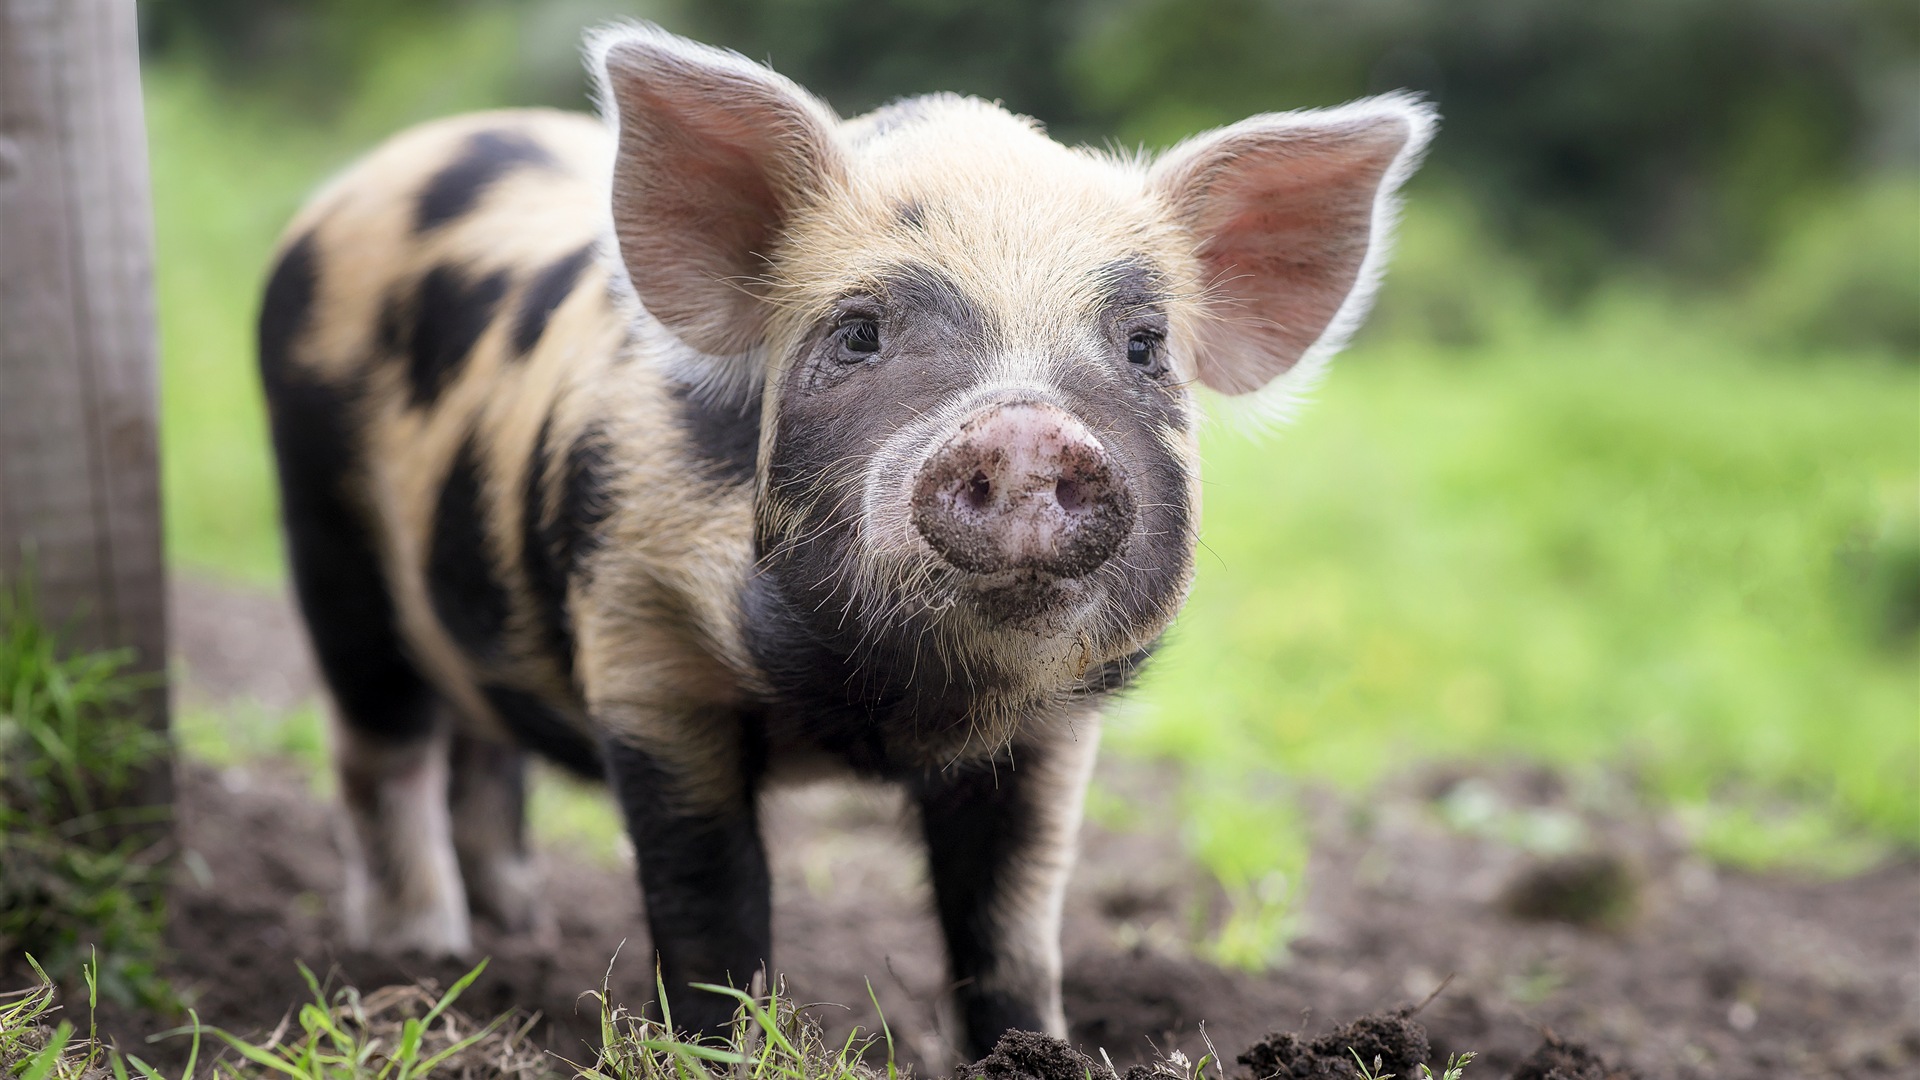 Pig Year about pigs HD wallpapers #8 - 1920x1080